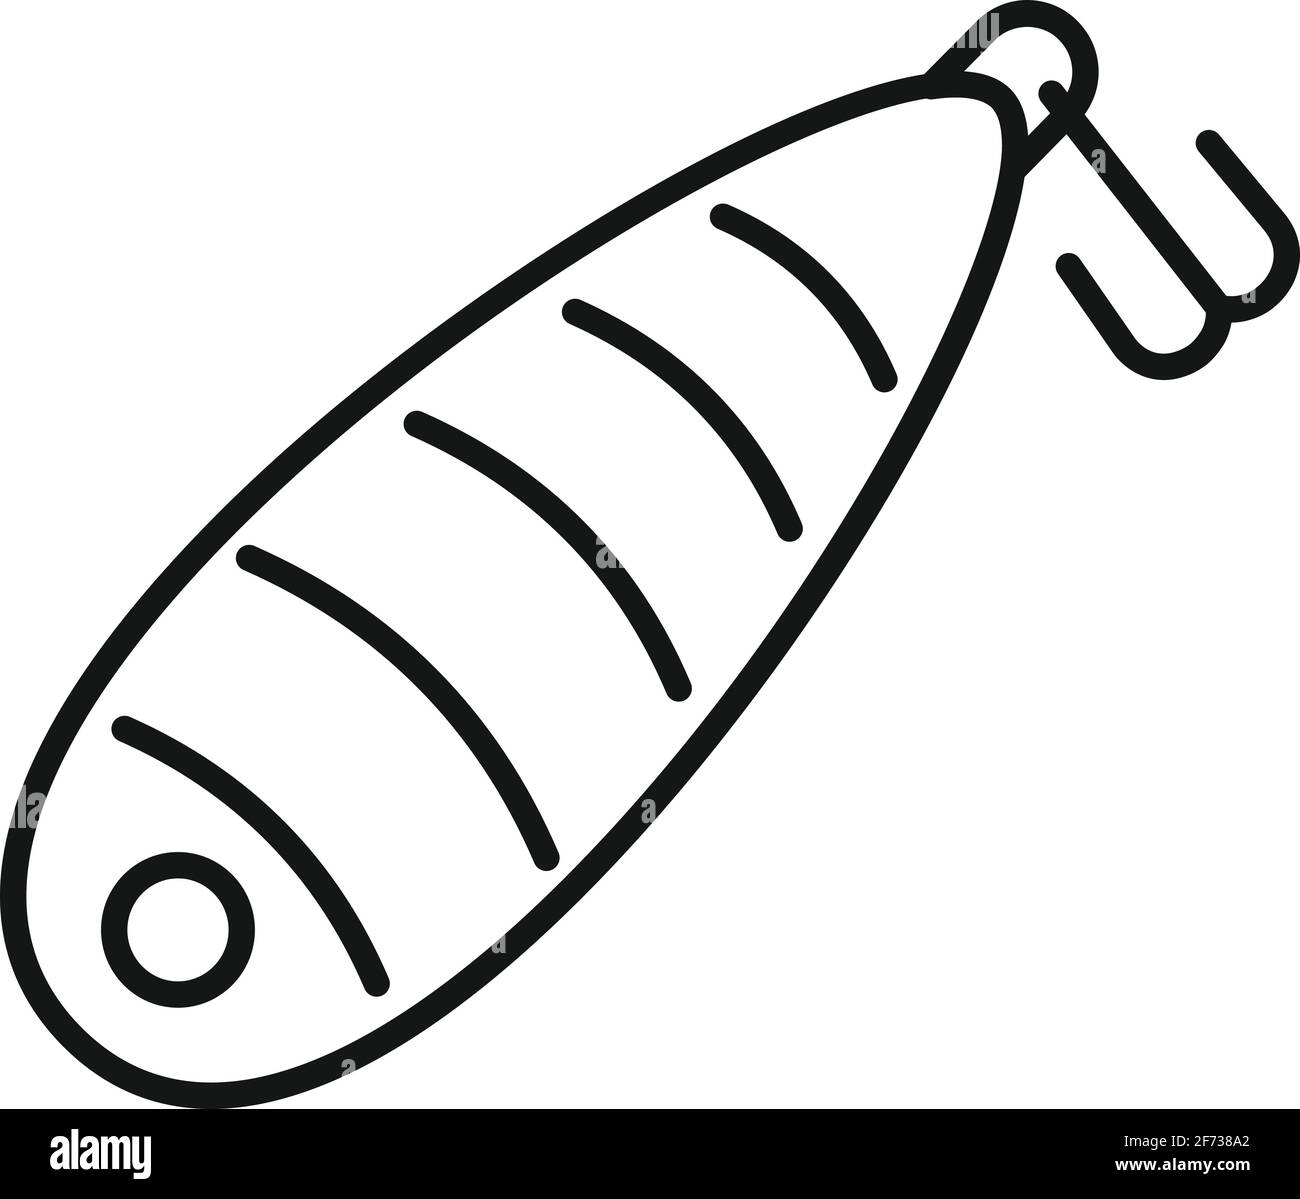 Fish bait lure icon, outline style Stock Vector